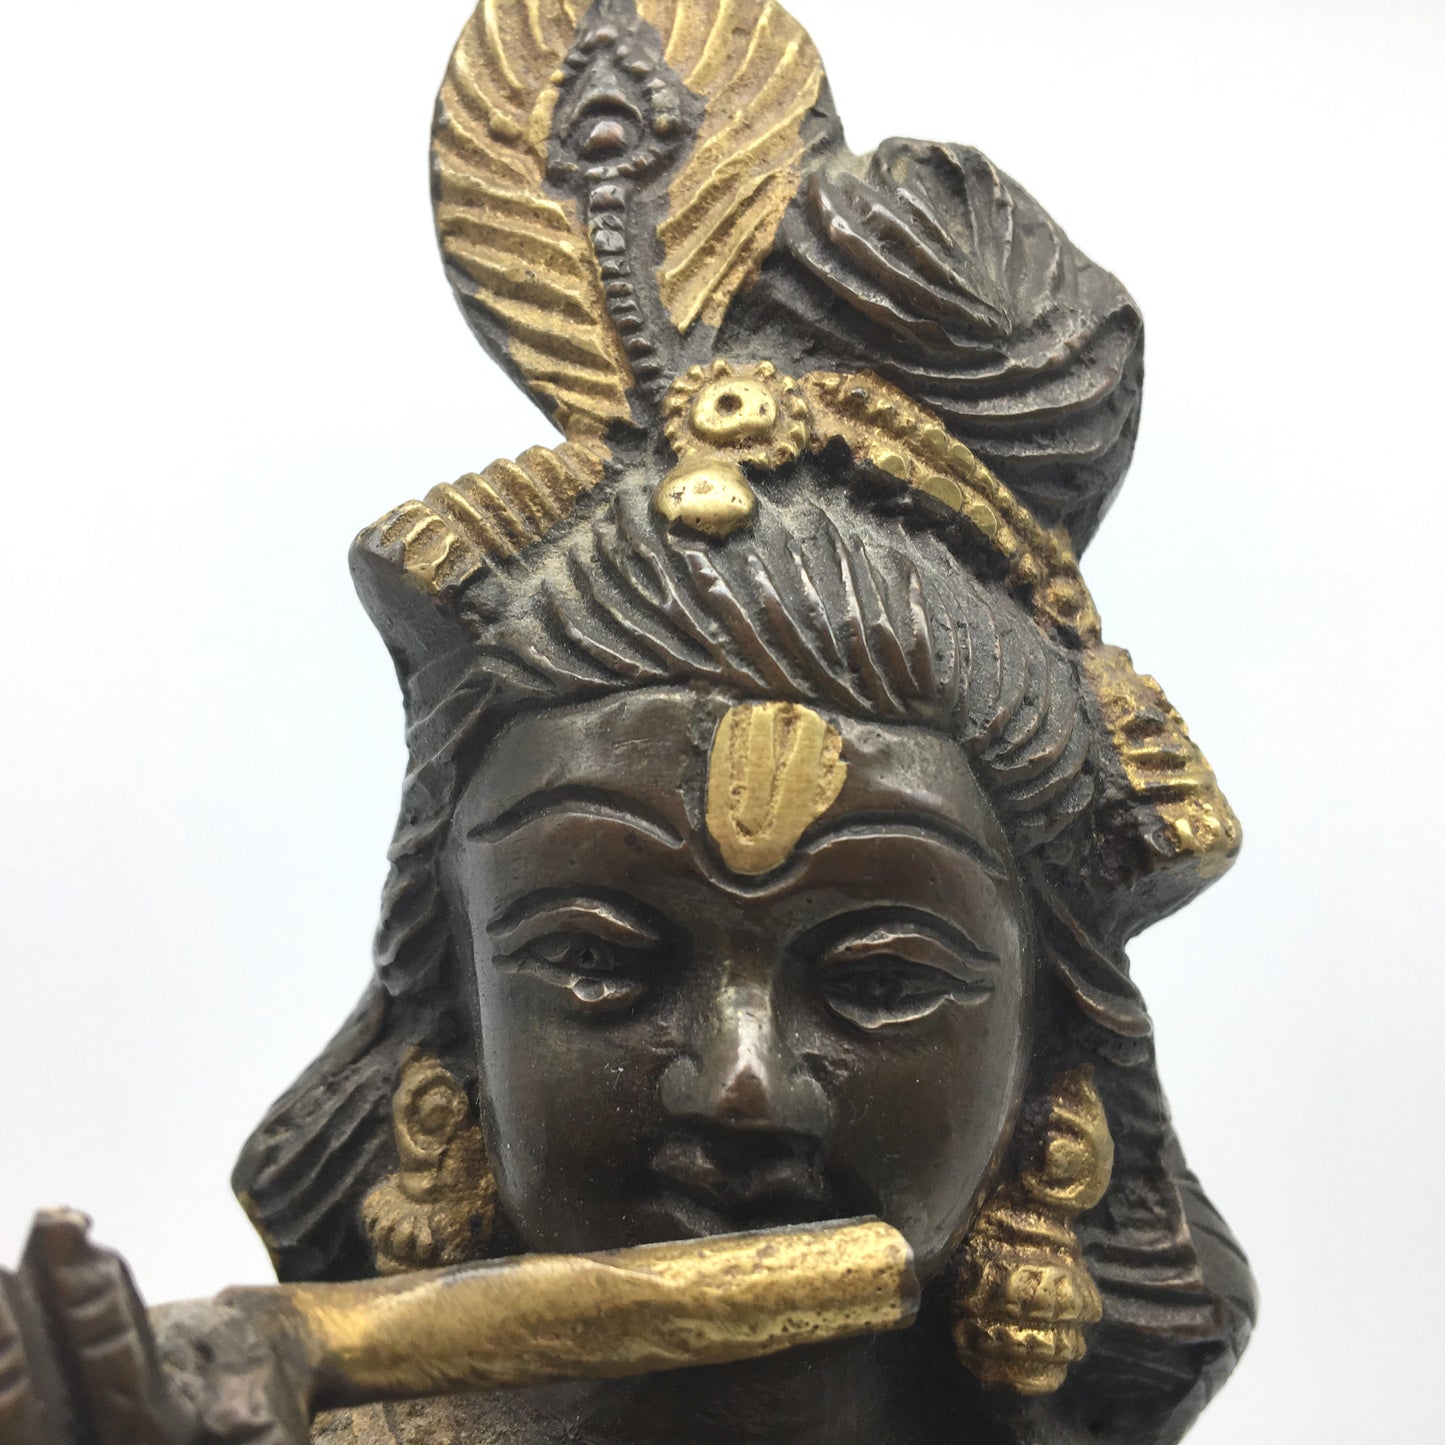 Handcrafted Antique Brass  India God Lord Krishna with Flute Murti Statue 10.2" - Montecinos Ethnic